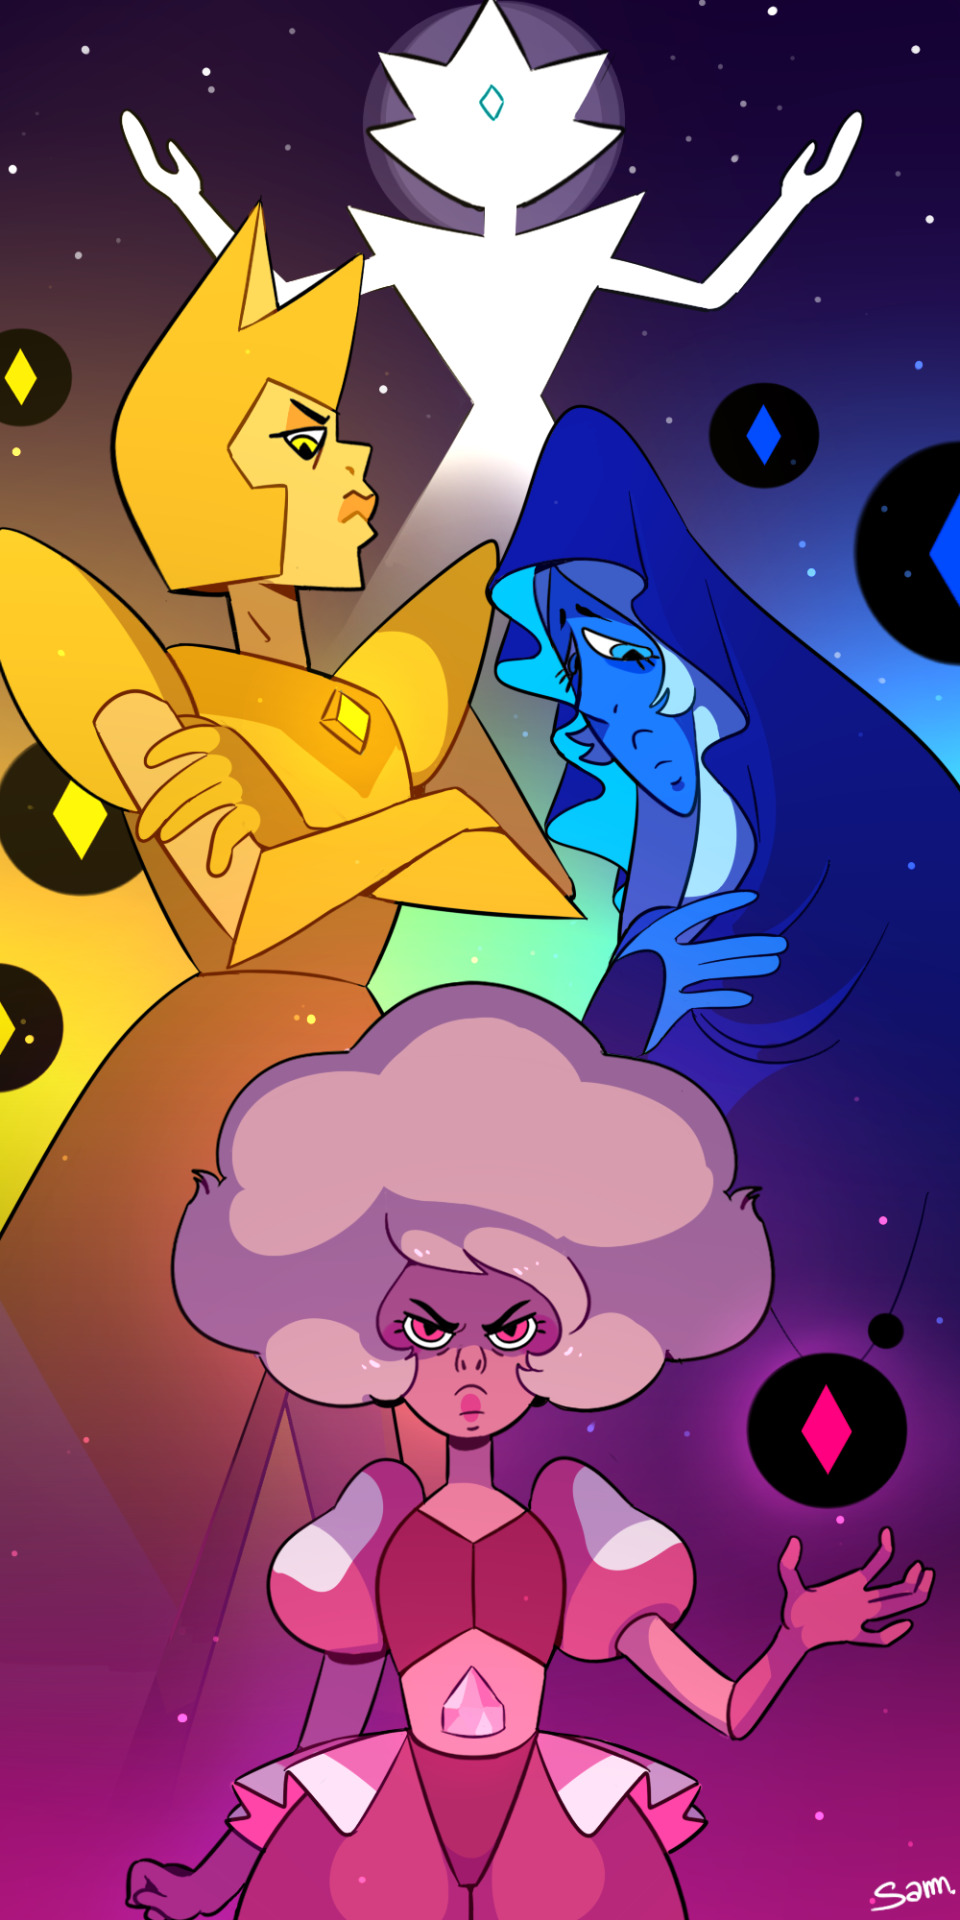 sam-ey:  The Great Diamond Authority I’m exhausted but I finished it! 